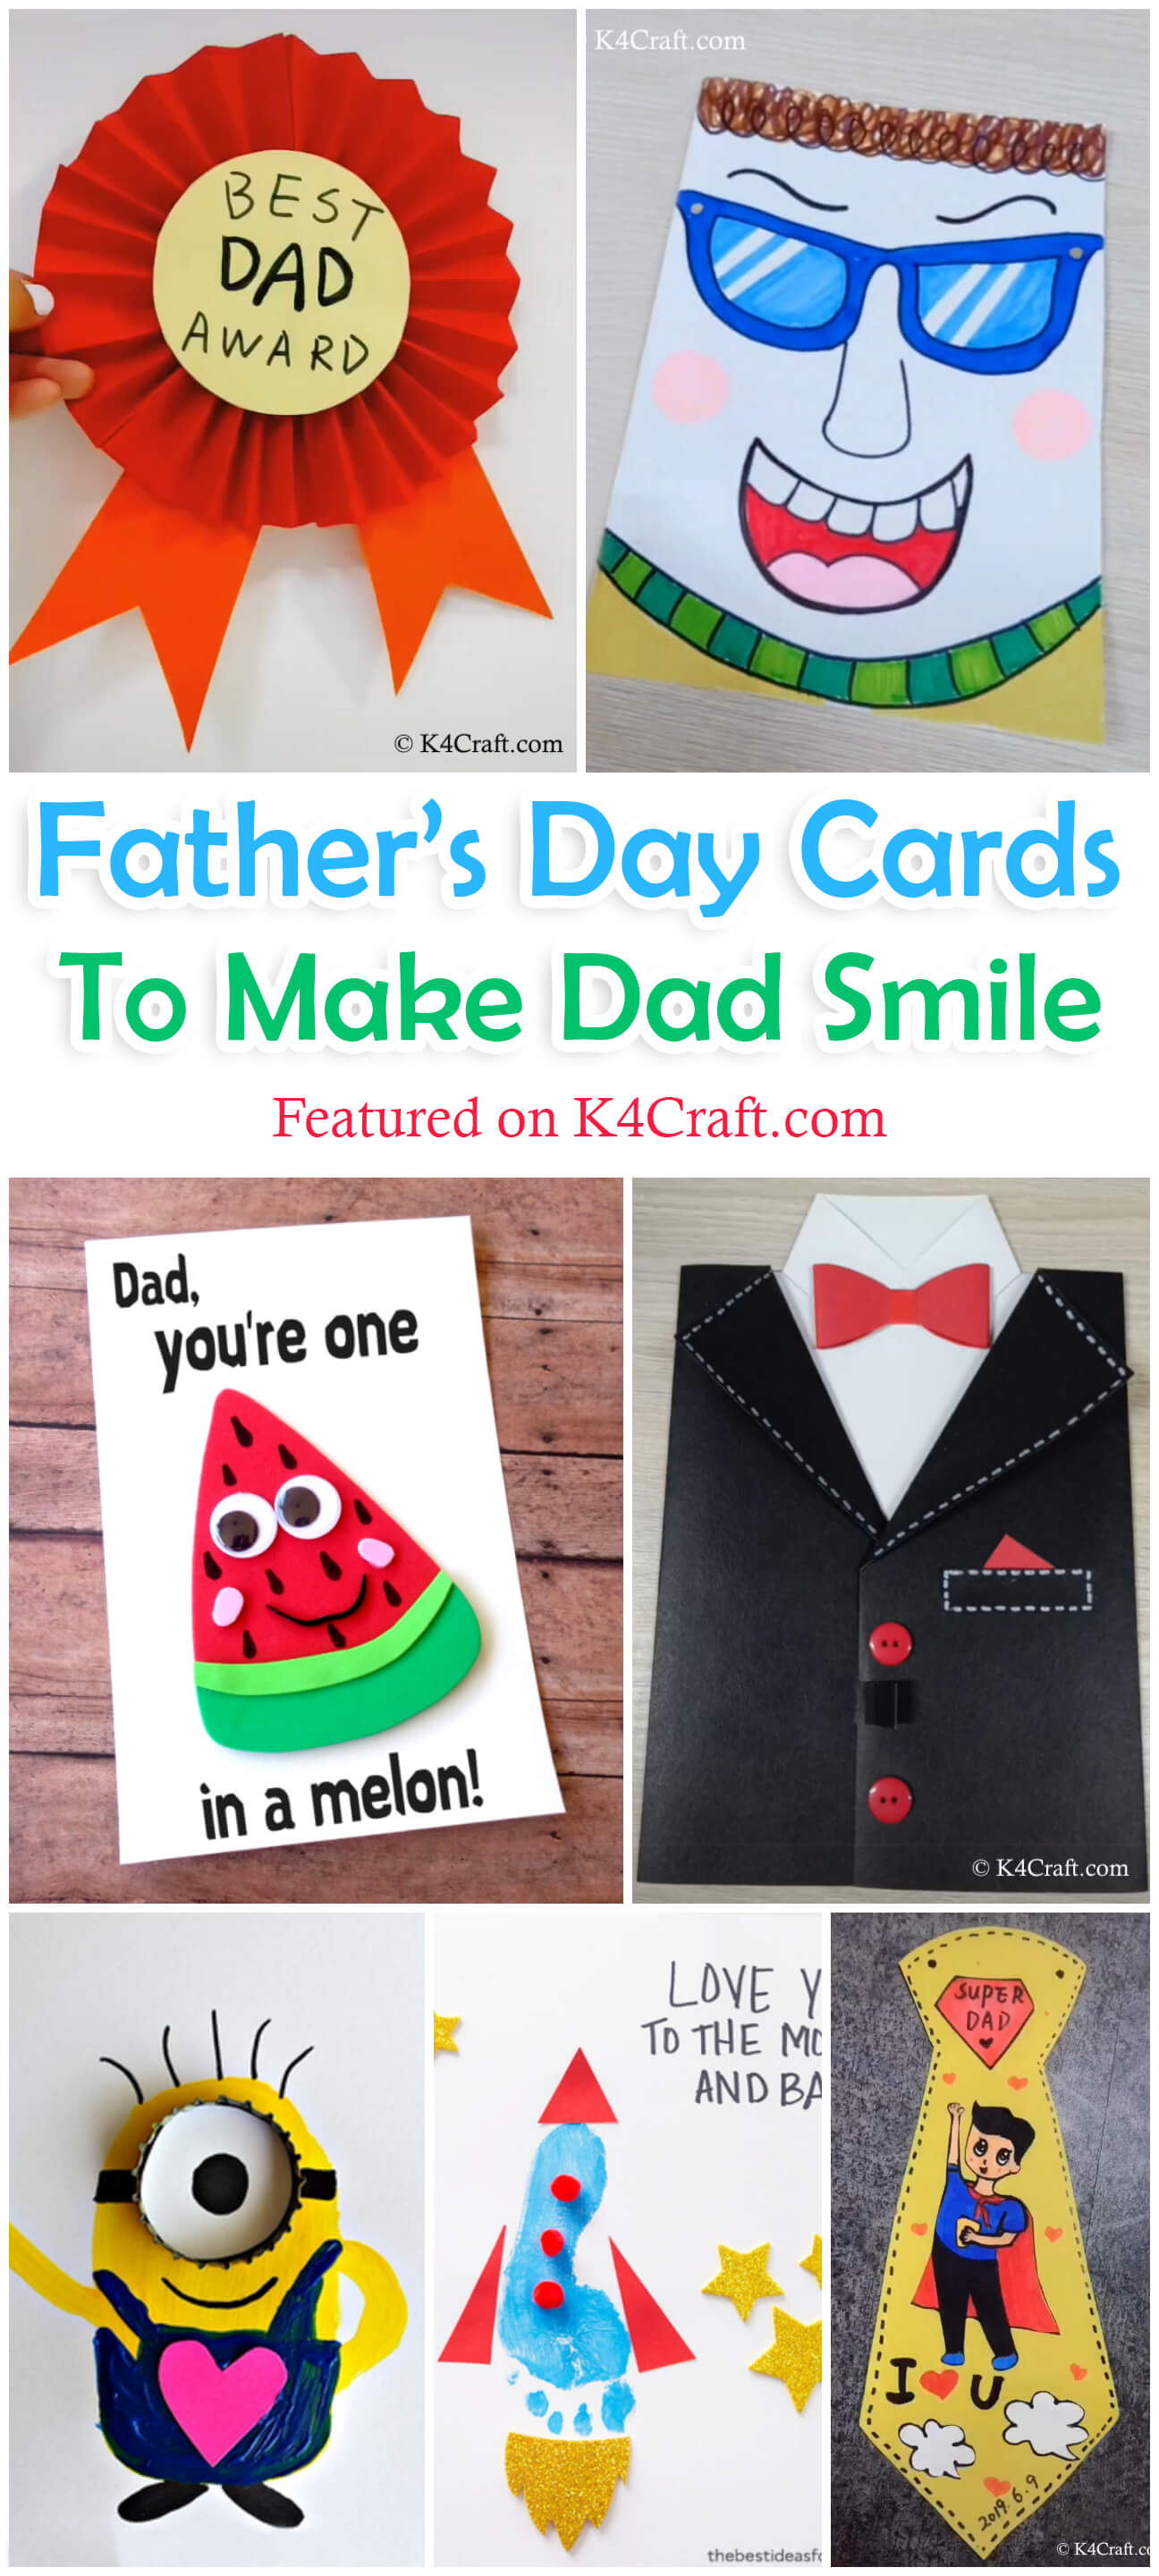 birthday-card-craft-ideas-for-dad-diy-fathers-day-cards-to-make-dad